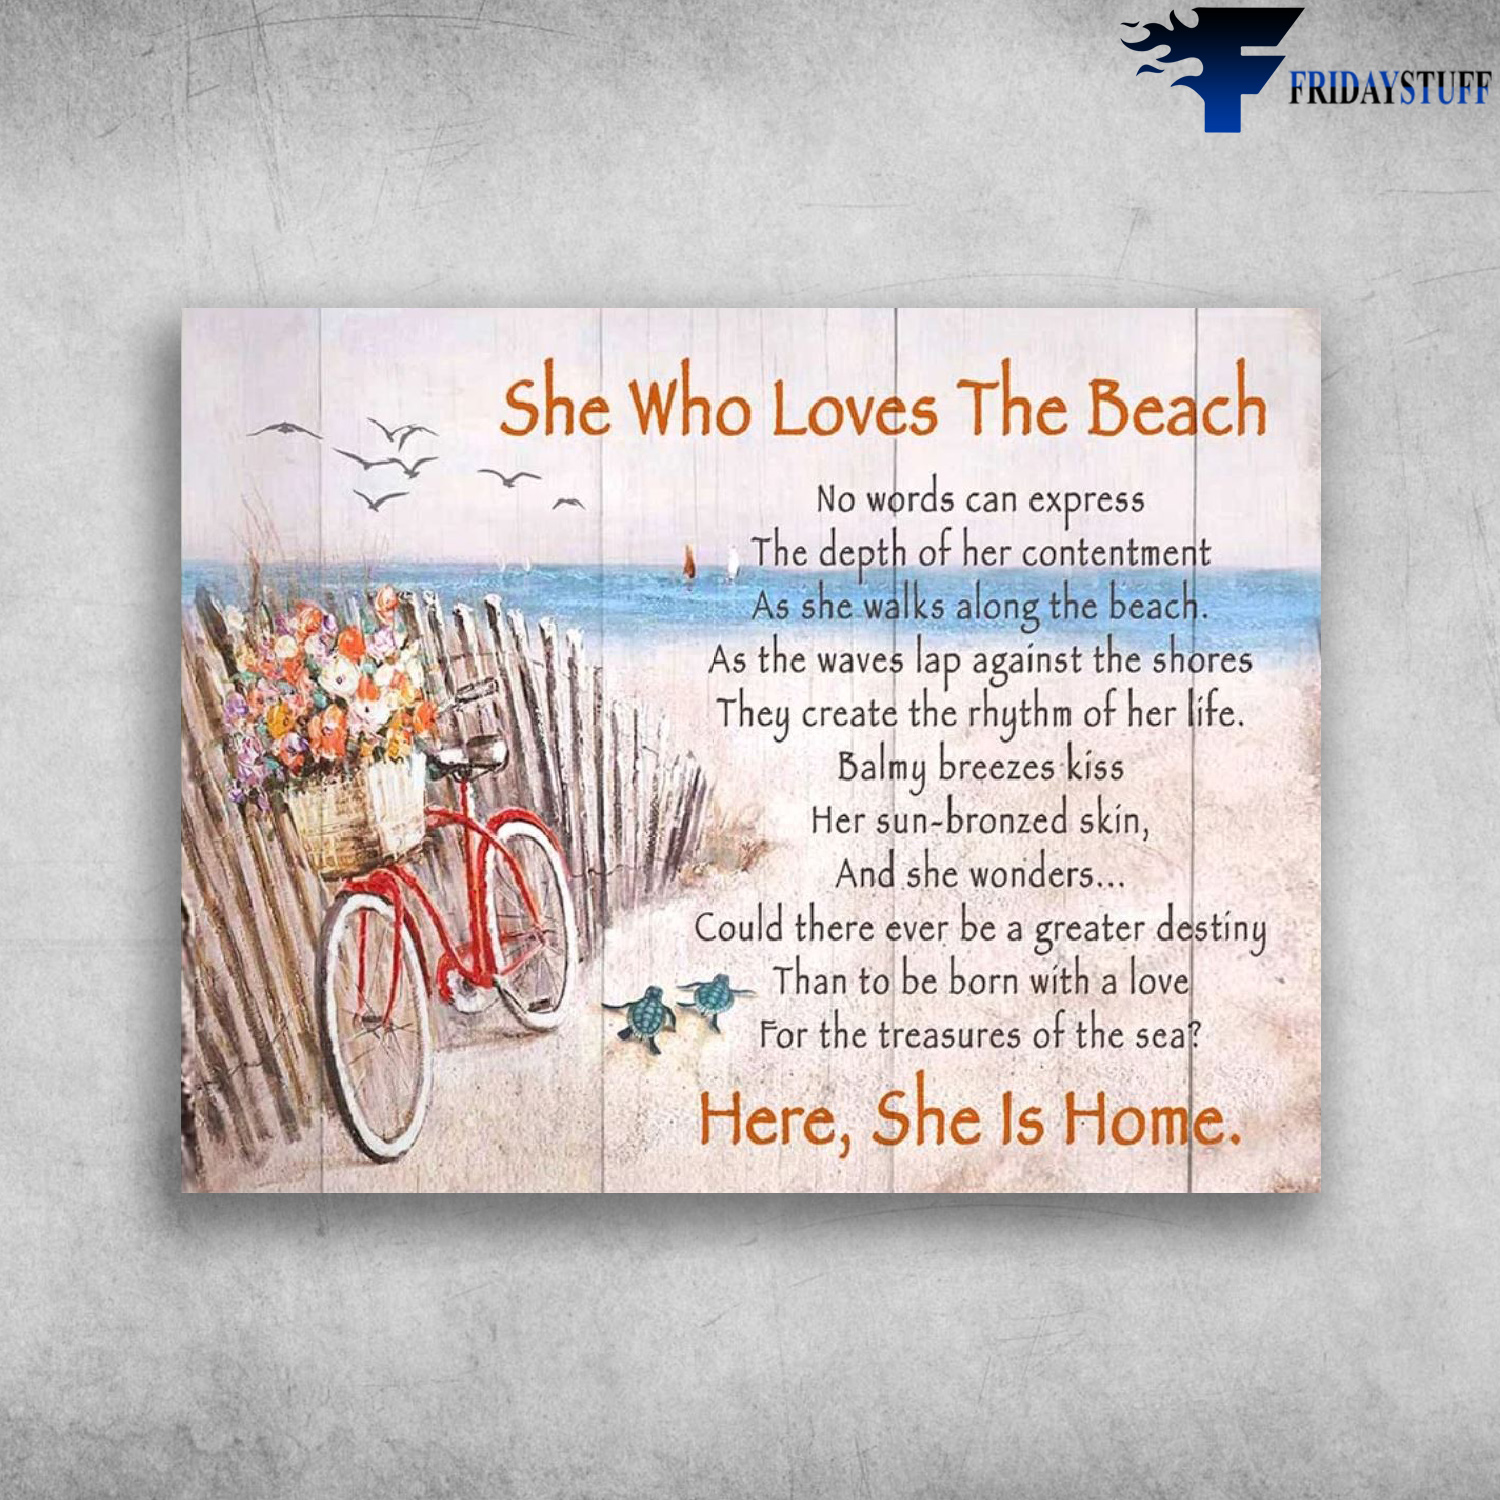 She Who Loves The Beach - Here, She Is Home.